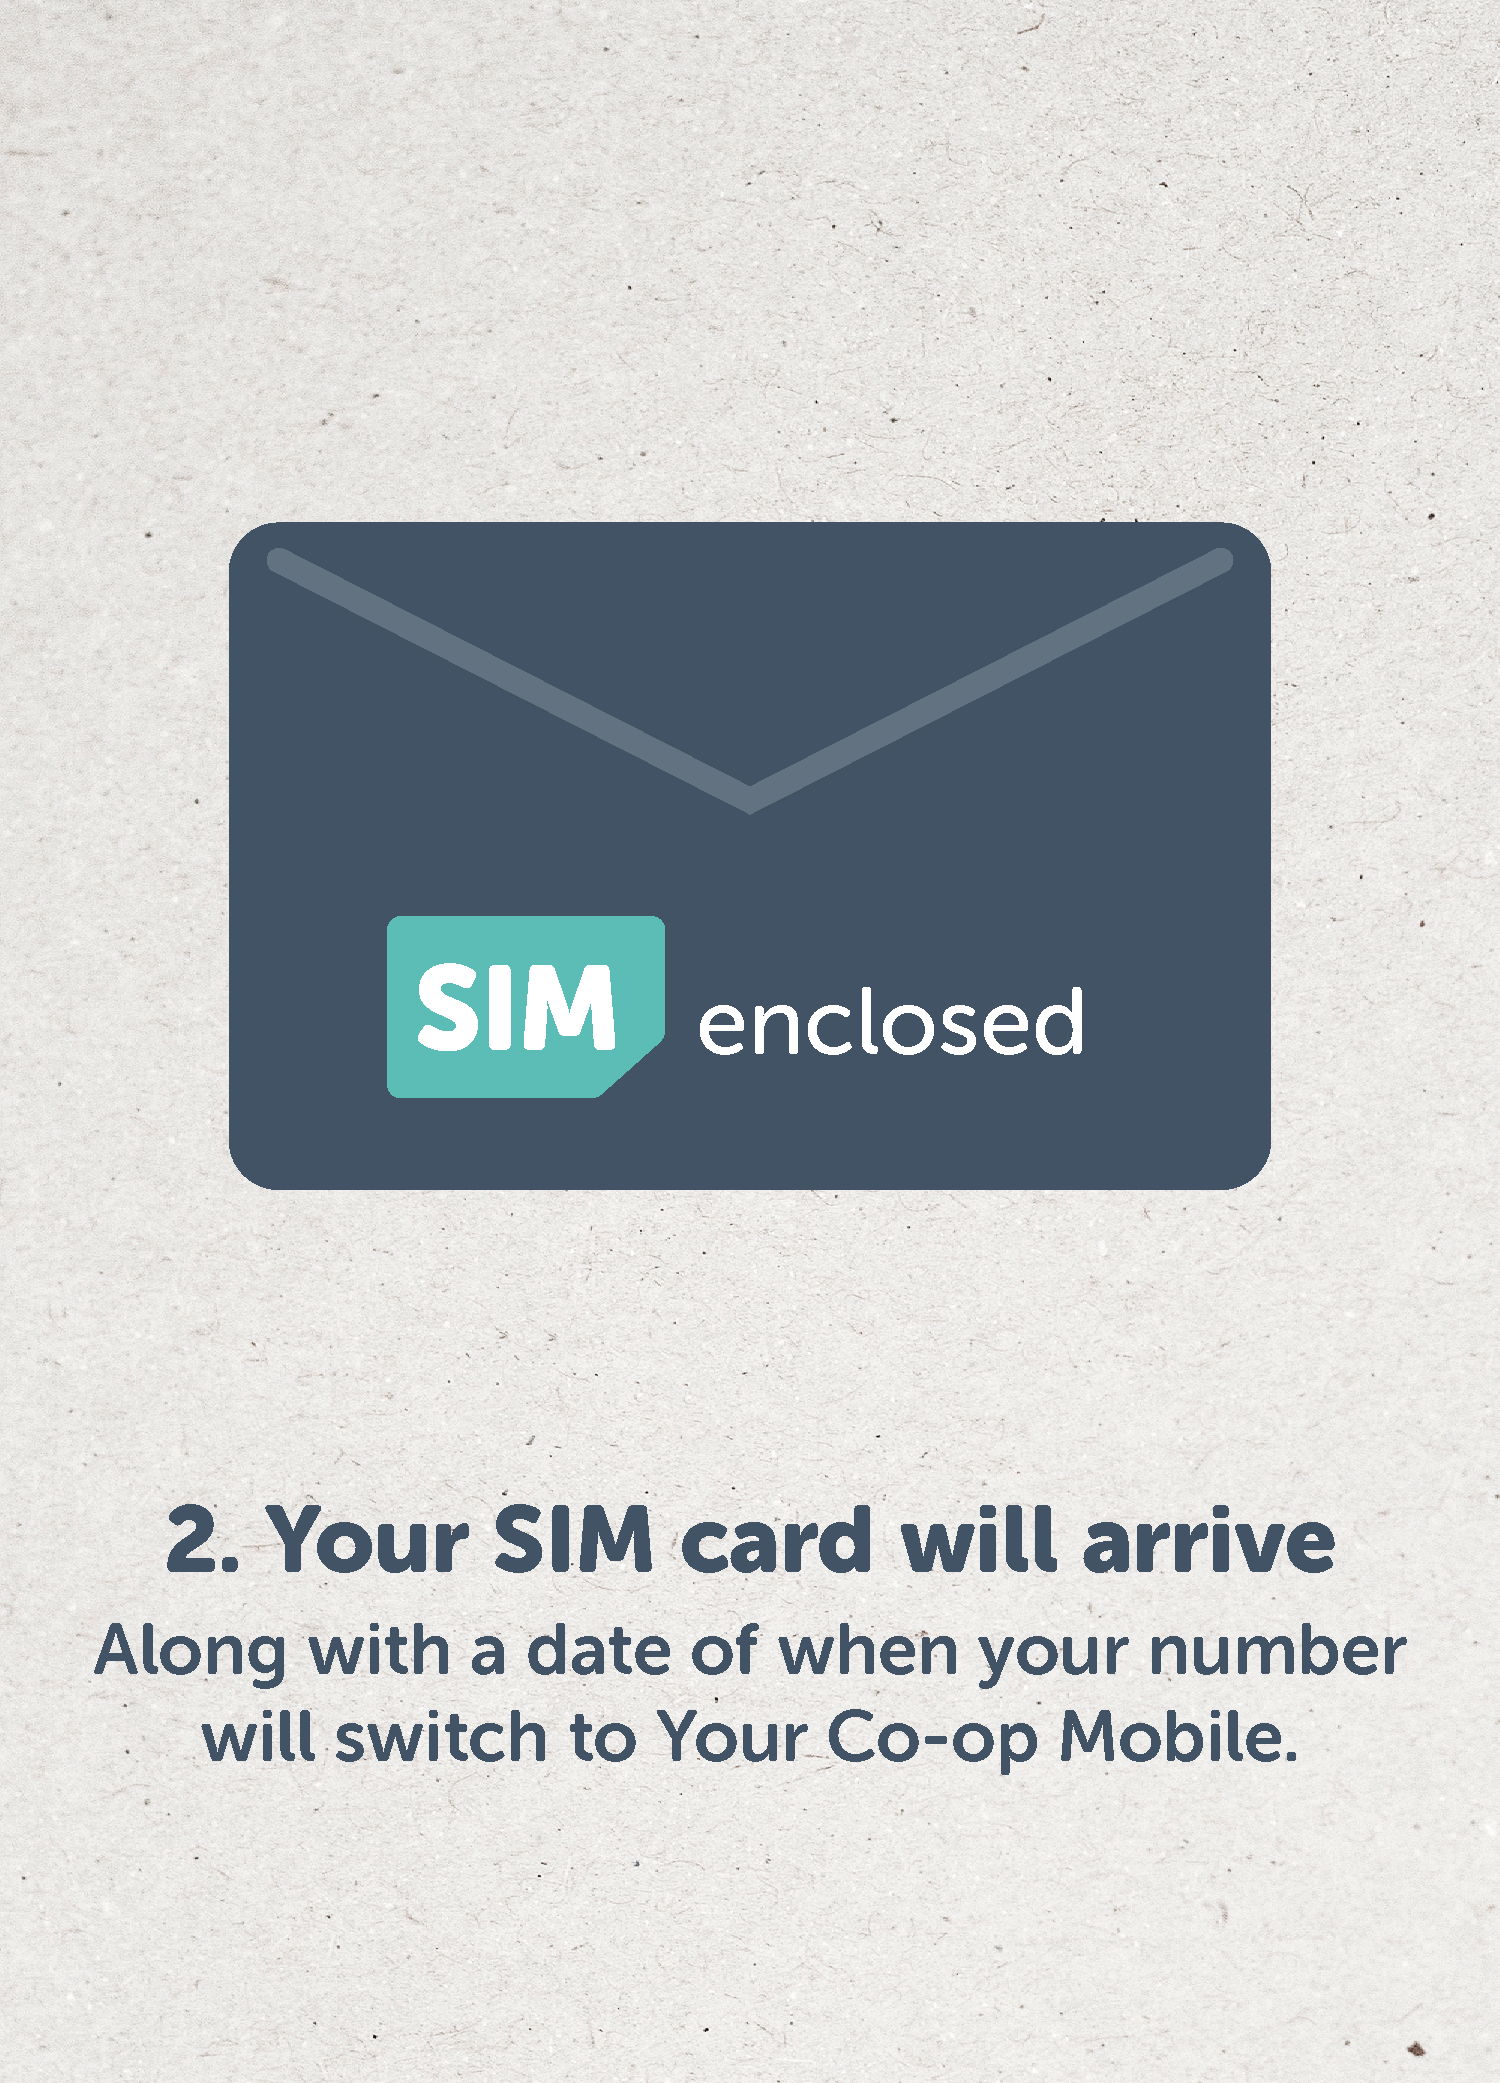 Your SIM card will arrive